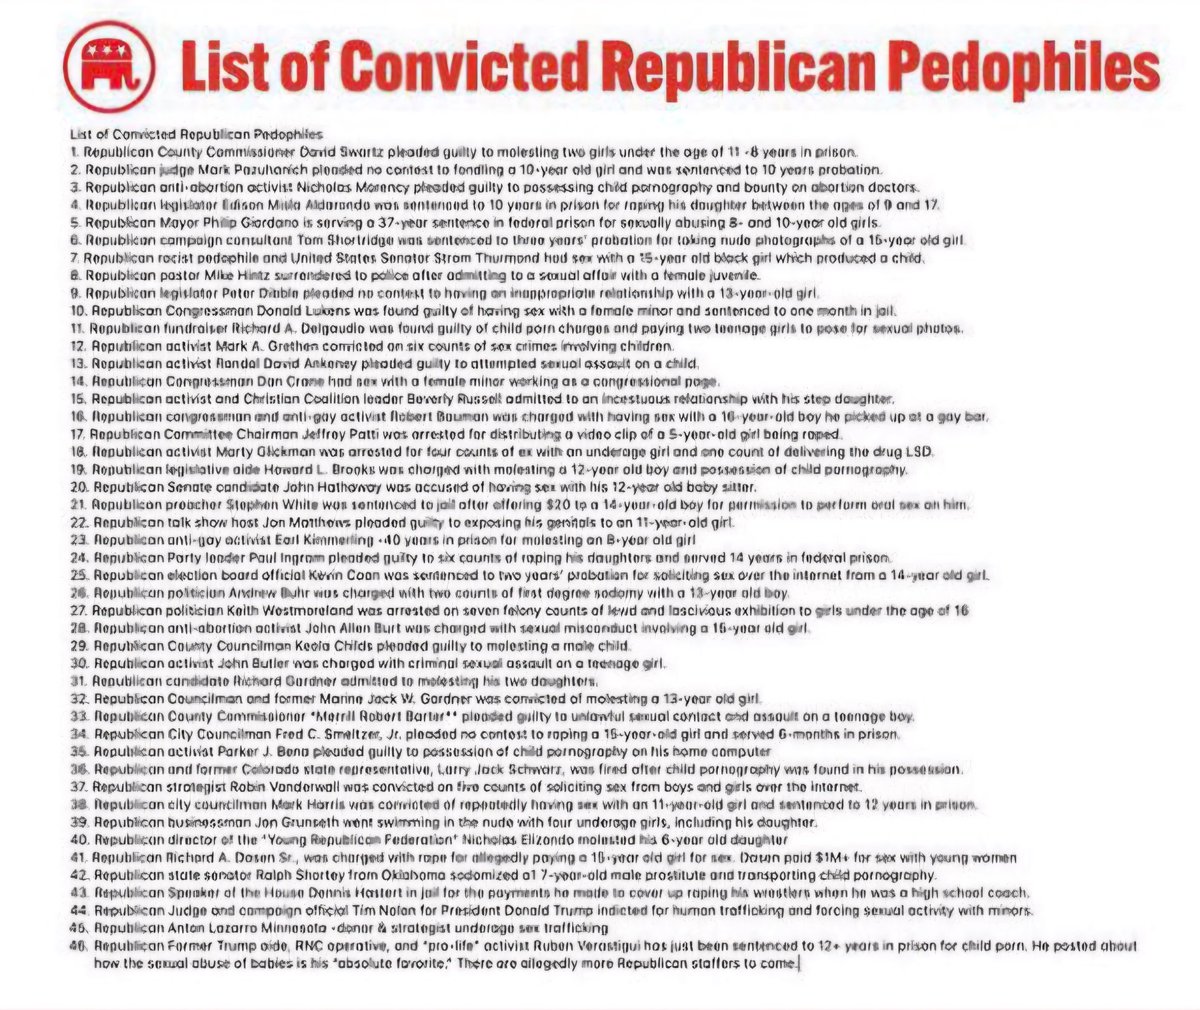 @Boemmelbaer @SoldierofResist @knifepoint100 As for pedophiles, the whole groomer thing was coined by Jack Posobiec, to distract from massive arrests of religious & Republican-related arrests for pedophilia & sexual assaults. Verastigui, a trump advisor, received 12 years for kiddie porn. He said he wants to rape a baby